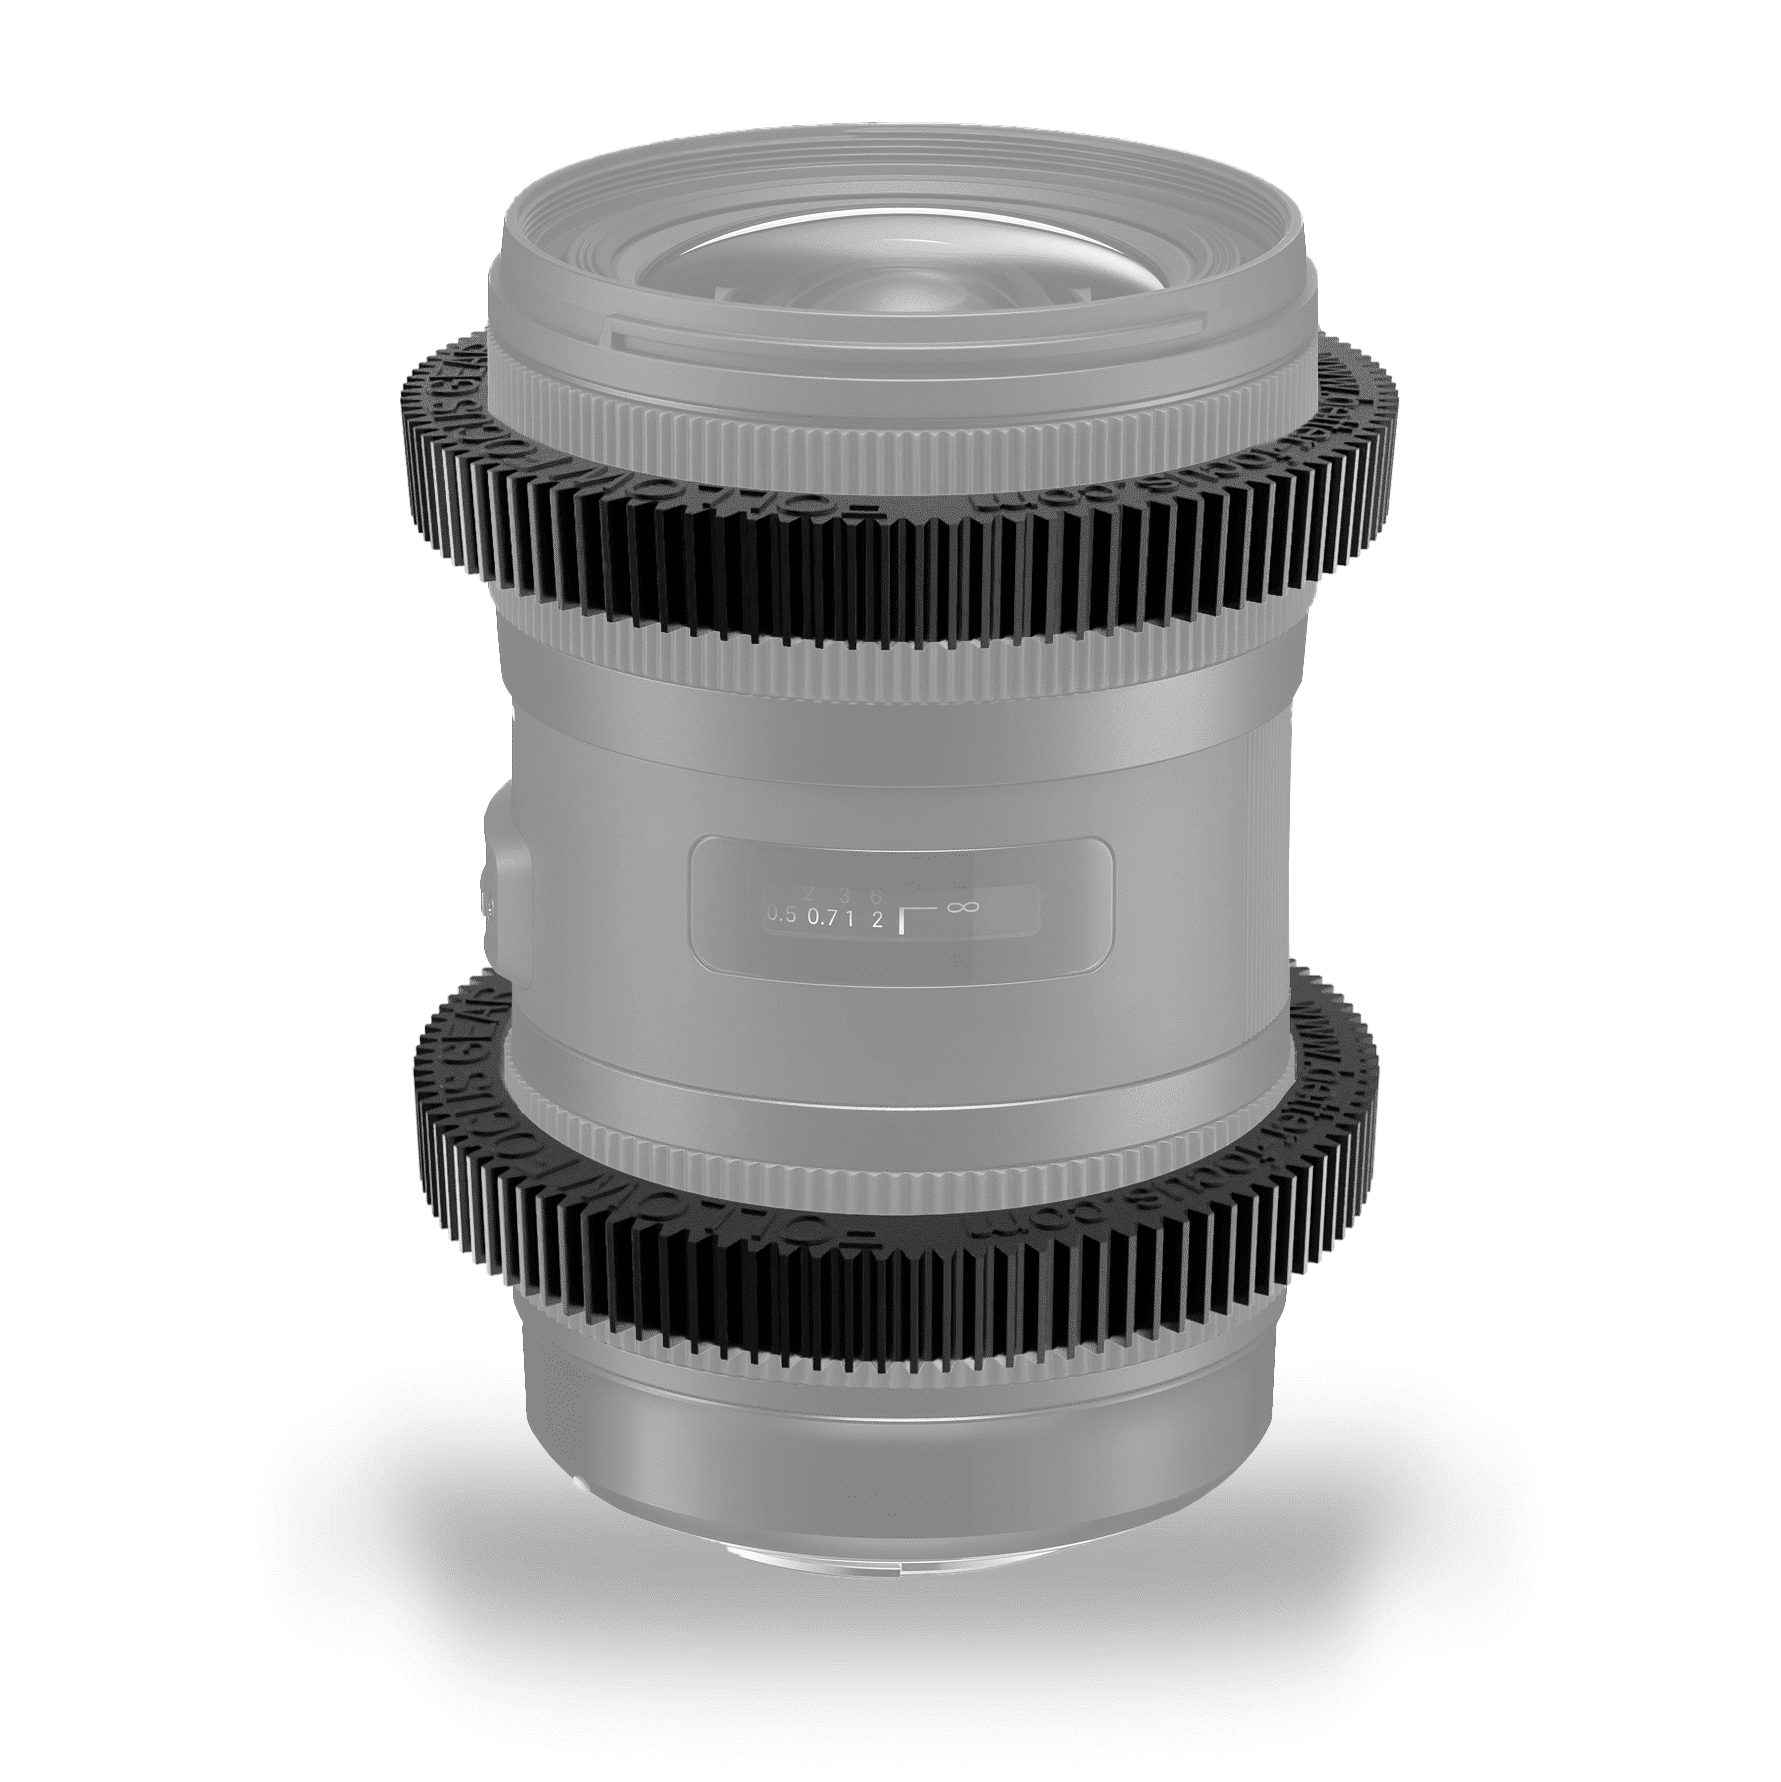 Follow Focus Ring for SIGMA 8-16MM F4.5-5.6 DC HSM lens